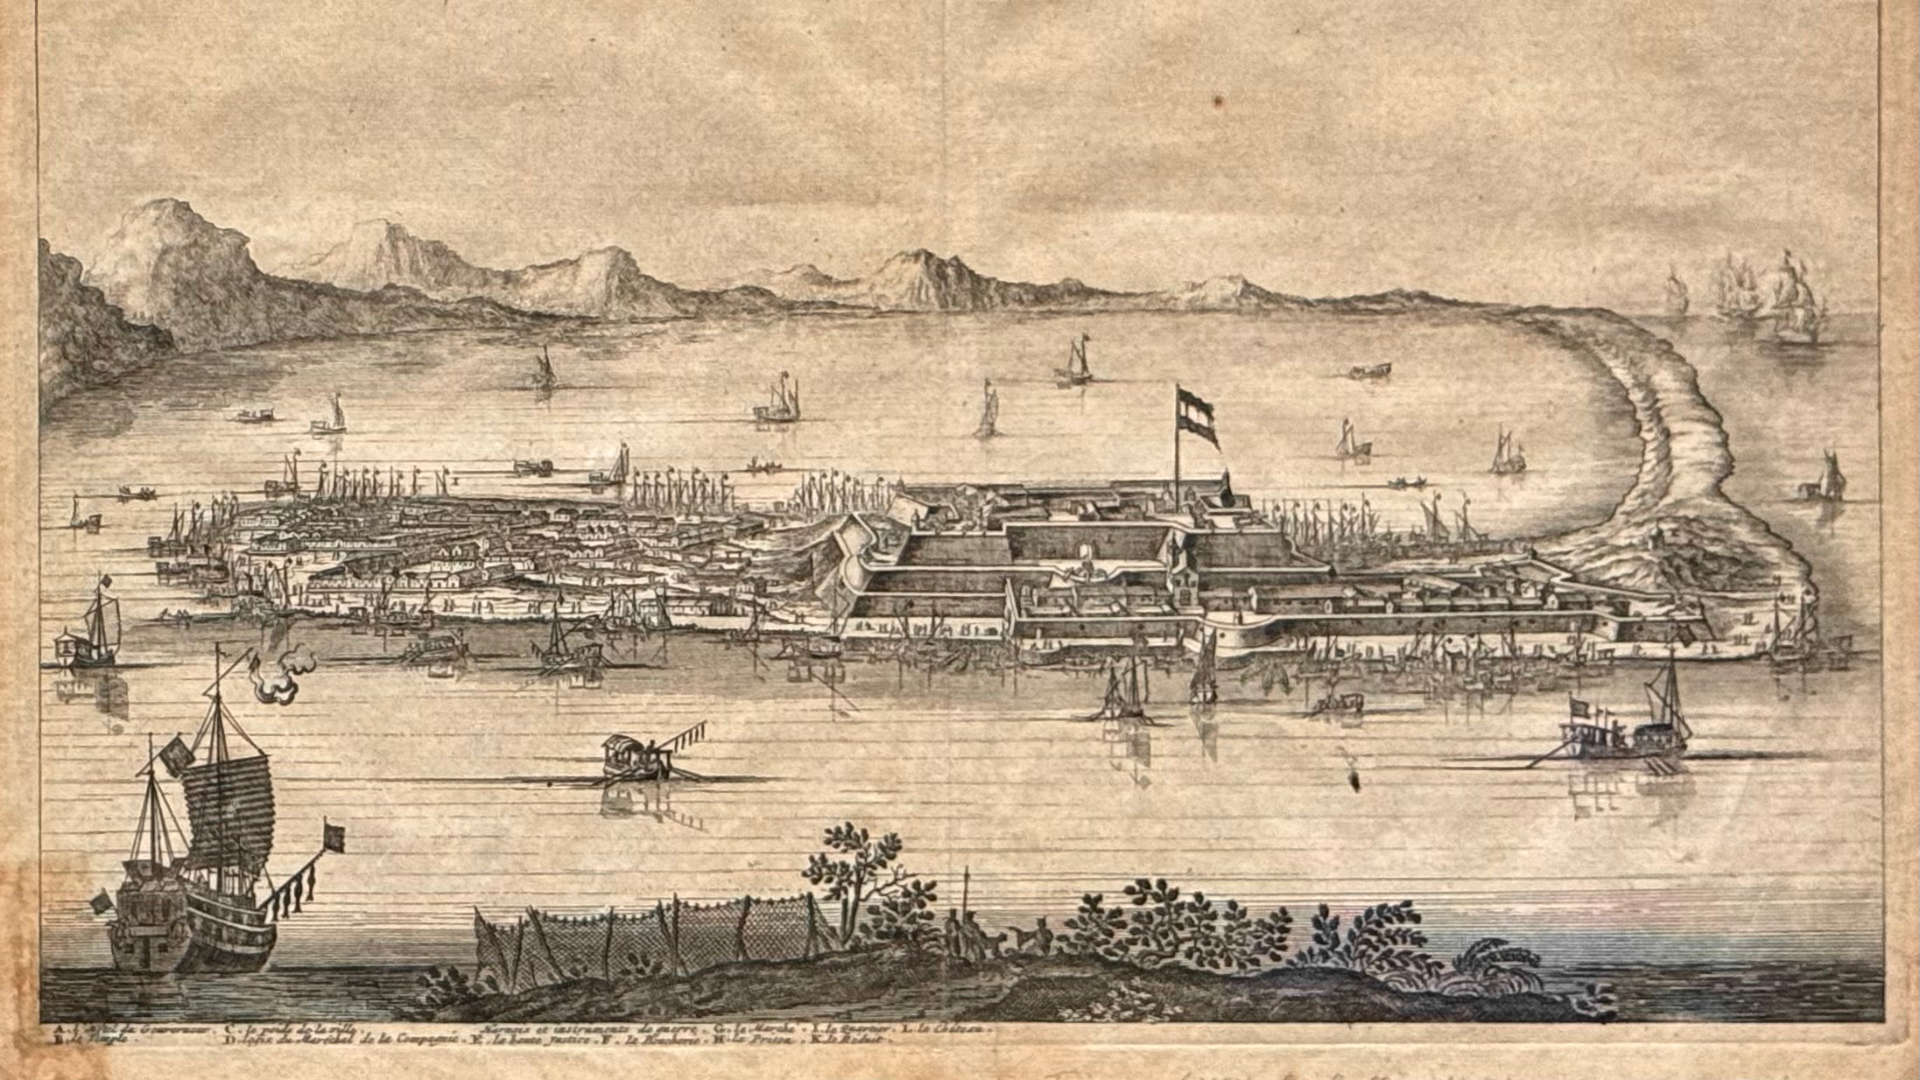 Photograph of an old map of Fort Zeelandia, Tainan.